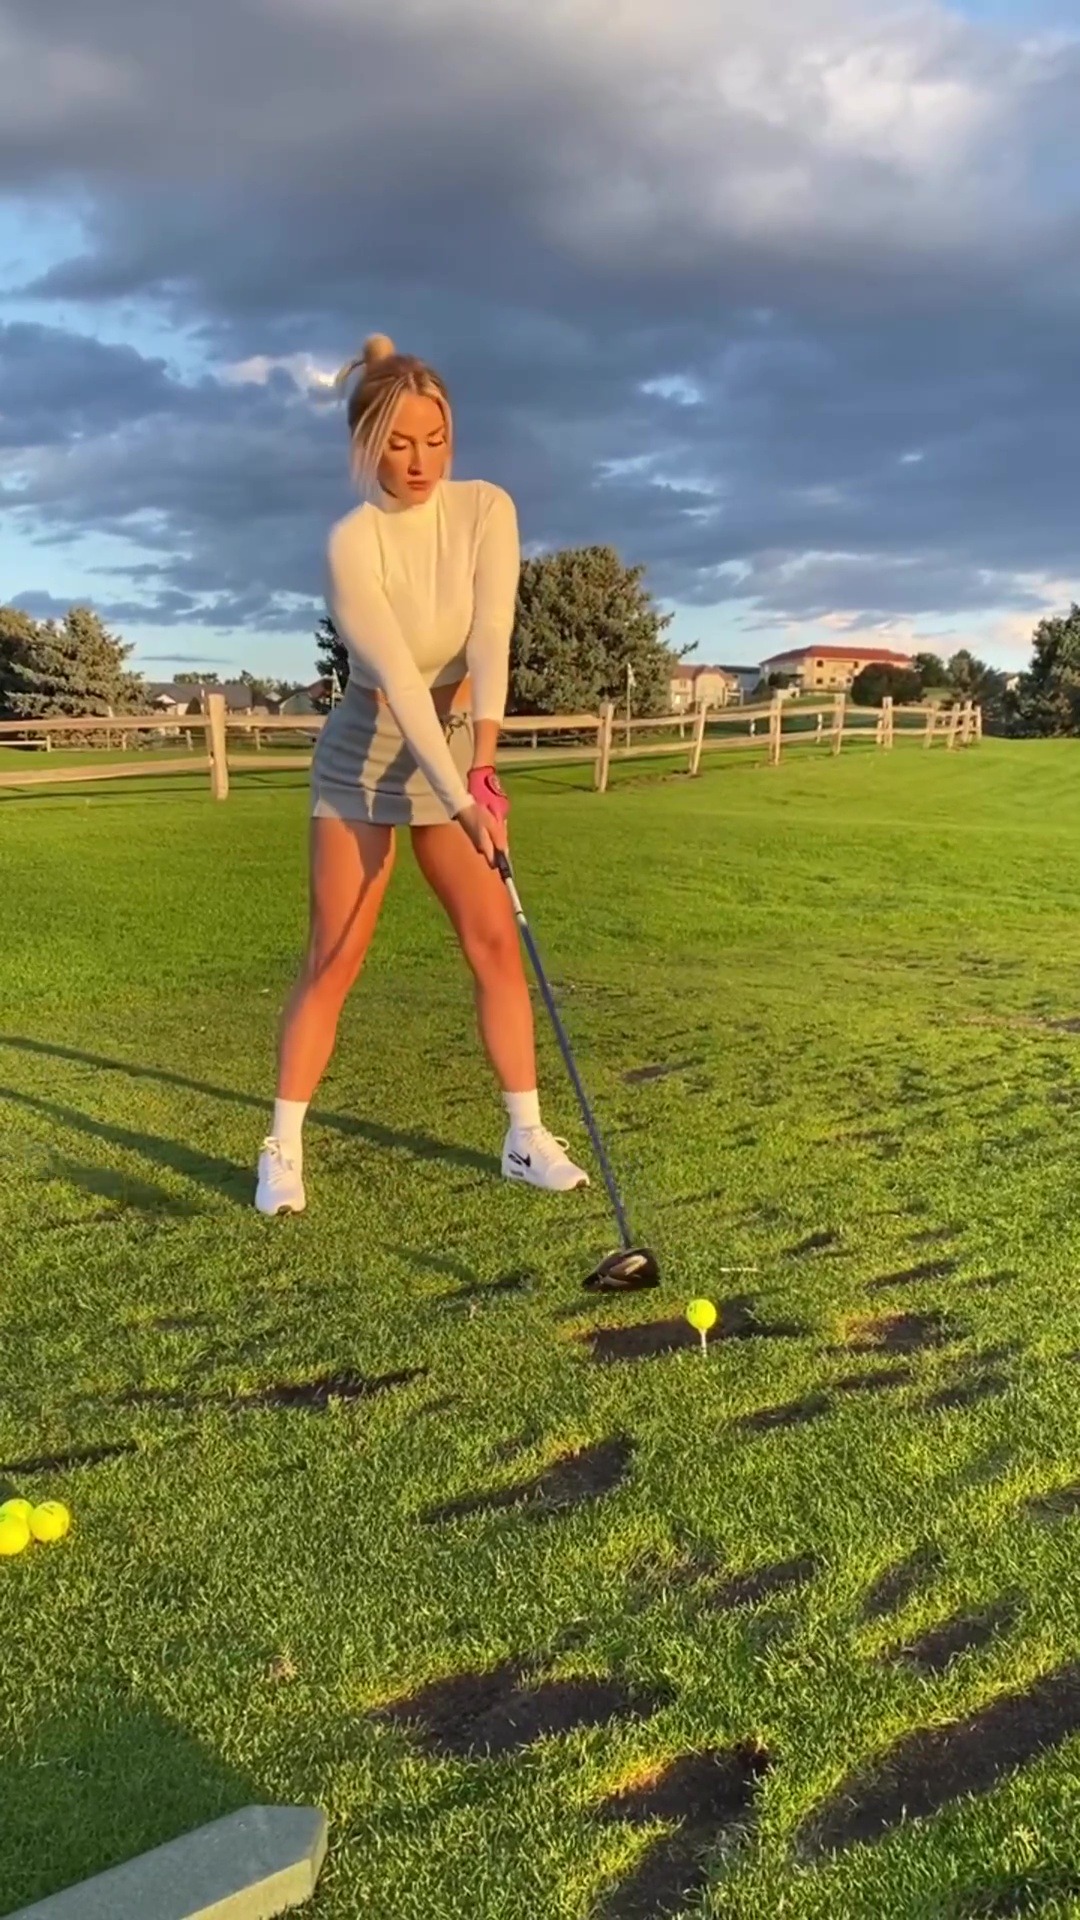 , Watch Paige Spiranac’s driving technique as she smashes golf ball while wearing figure-hugging top and mini-skirt